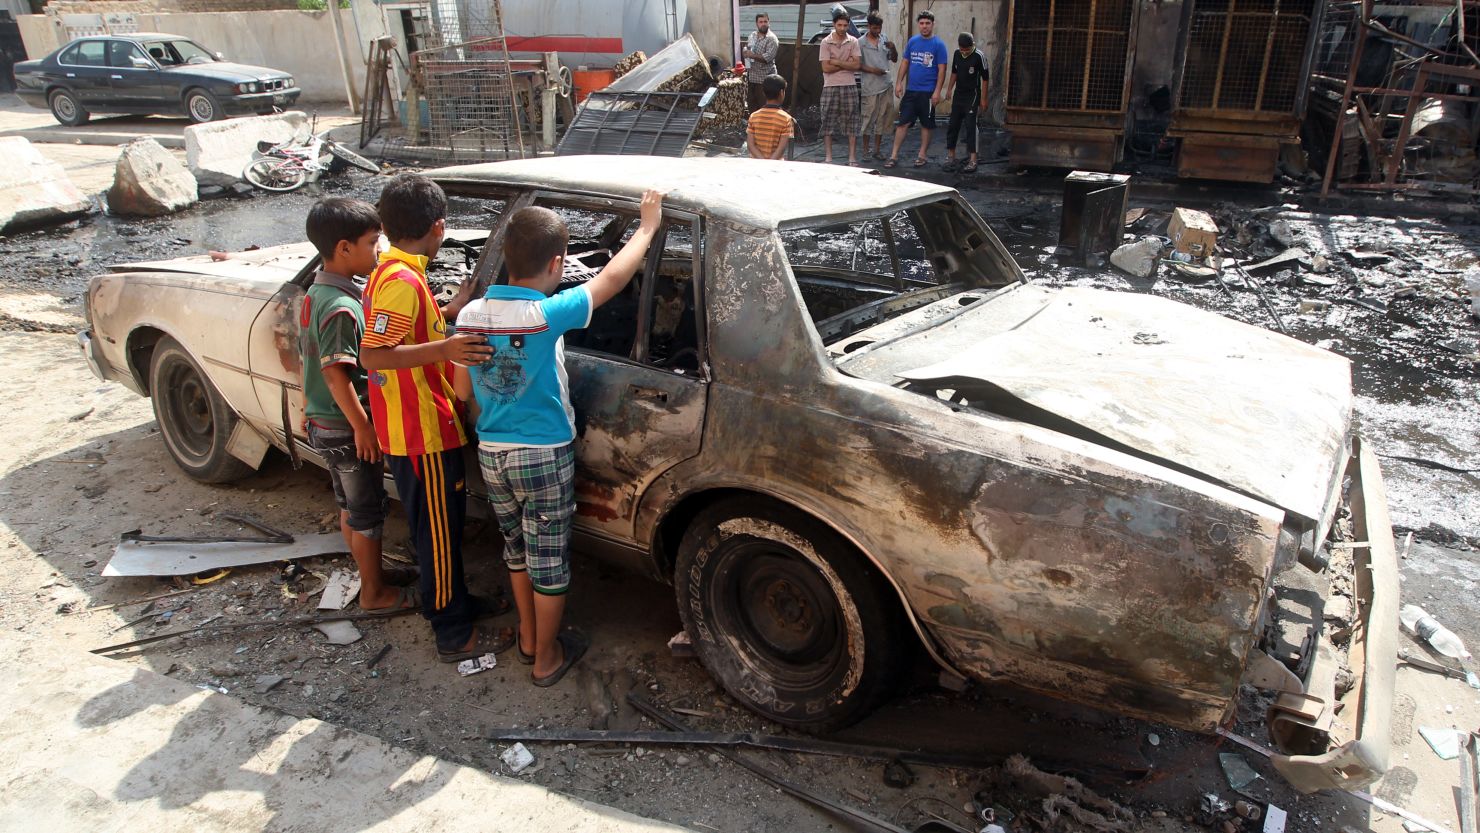 Children inspect a burned-out car after a car bomb exploded the previous day in Mashtal on September 16, 2013.